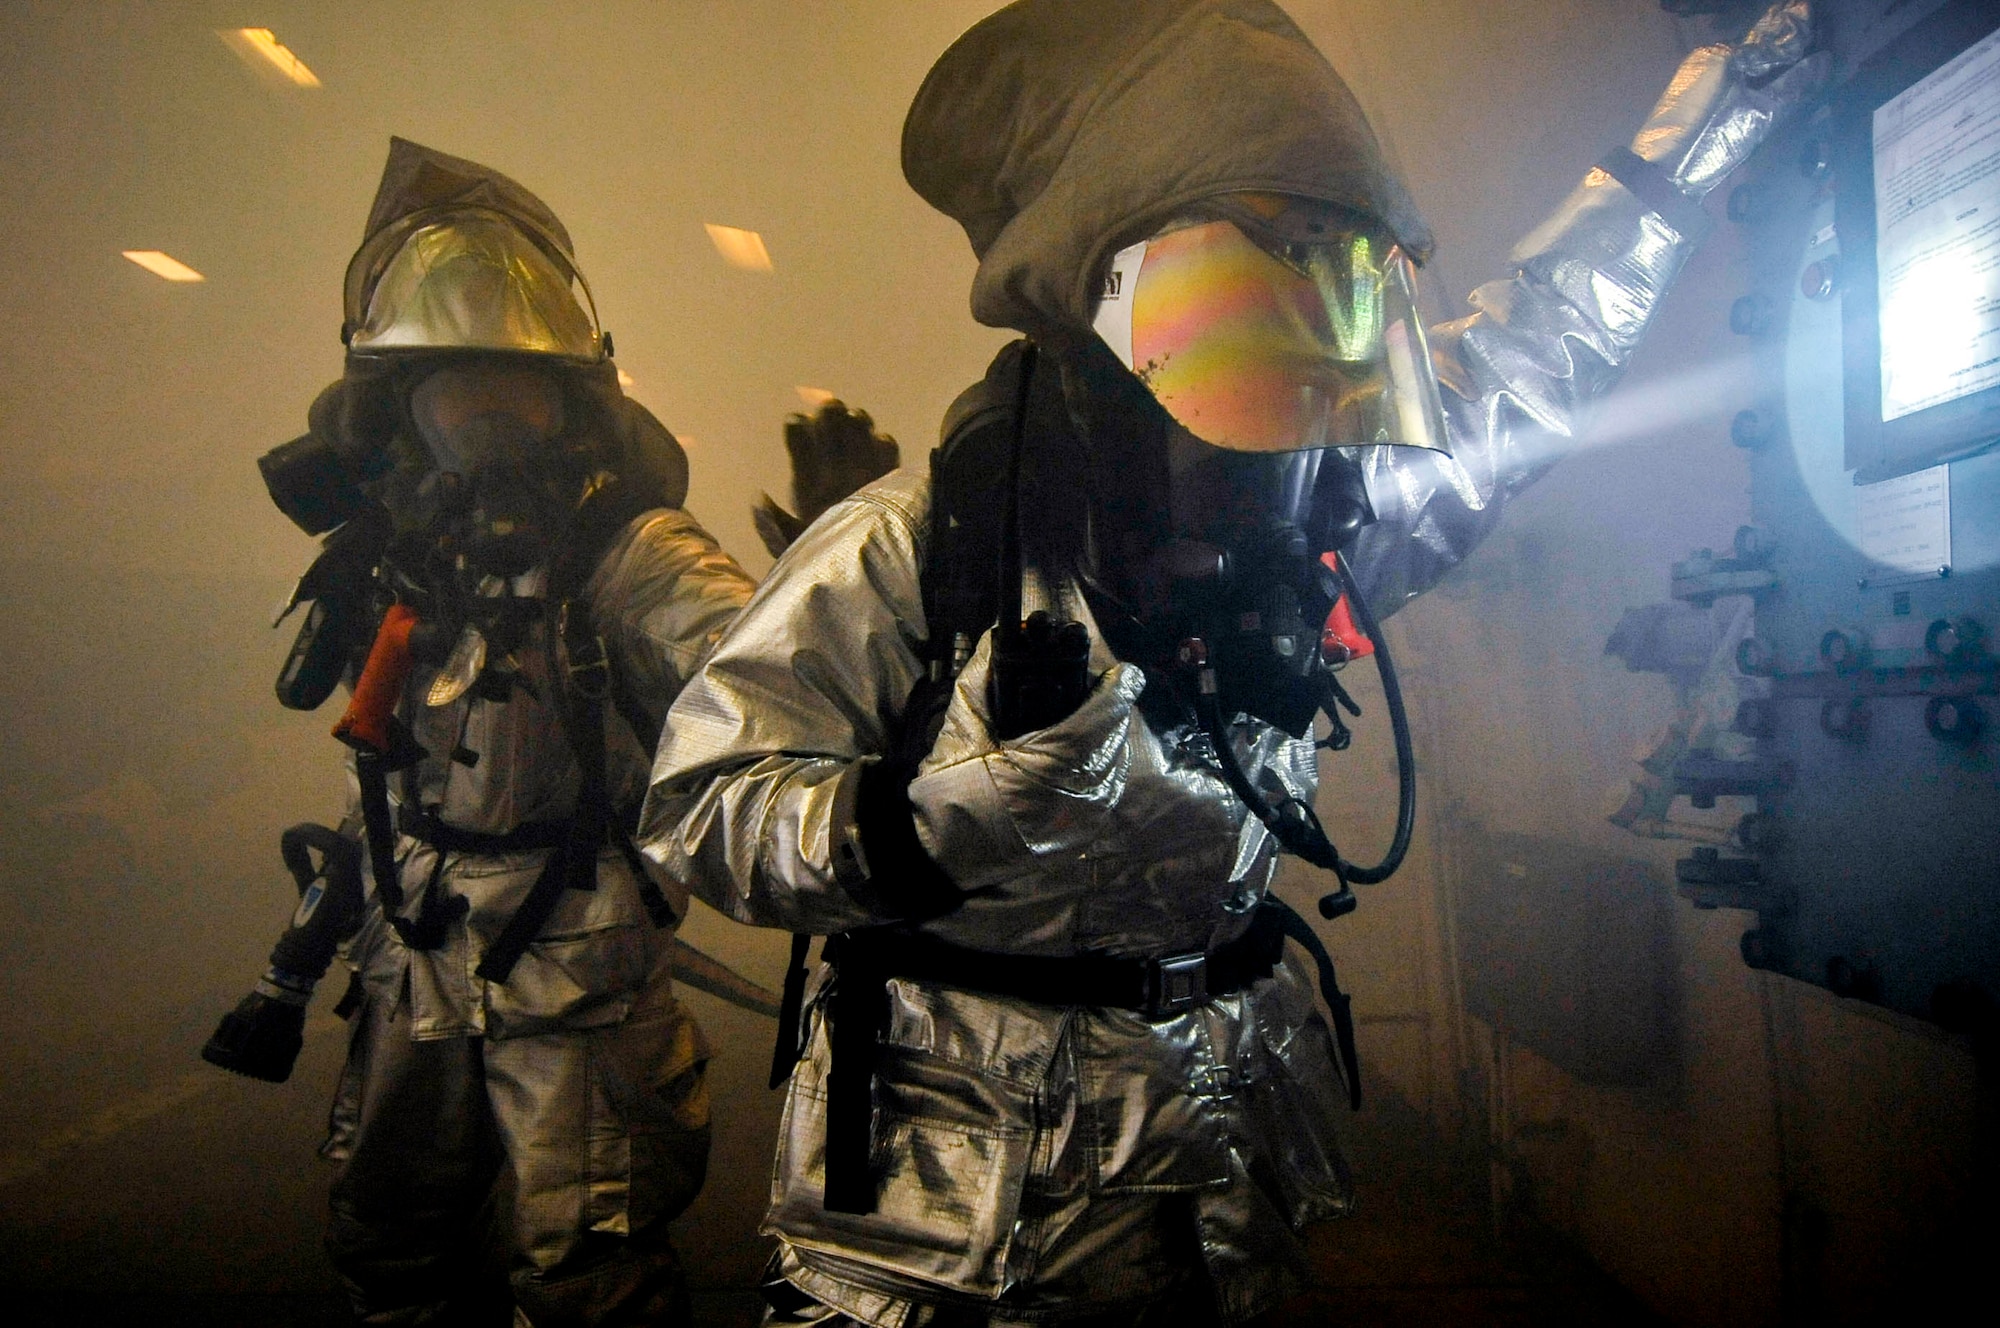 Firefighters from the 35th Civil Engineer Squadron cleared smoke from a Hardened Aircraft Shelter by opening the main doors during an Operational Readiness Exercise at Misawa Air Base, Japan, June 18, 2013. A four-man team put out a simulated fire and rescued an unconscious pilot from a smoke filled cockpit. (U.S. Air Force photo by Staff Sgt. Nathan Lipscomb)